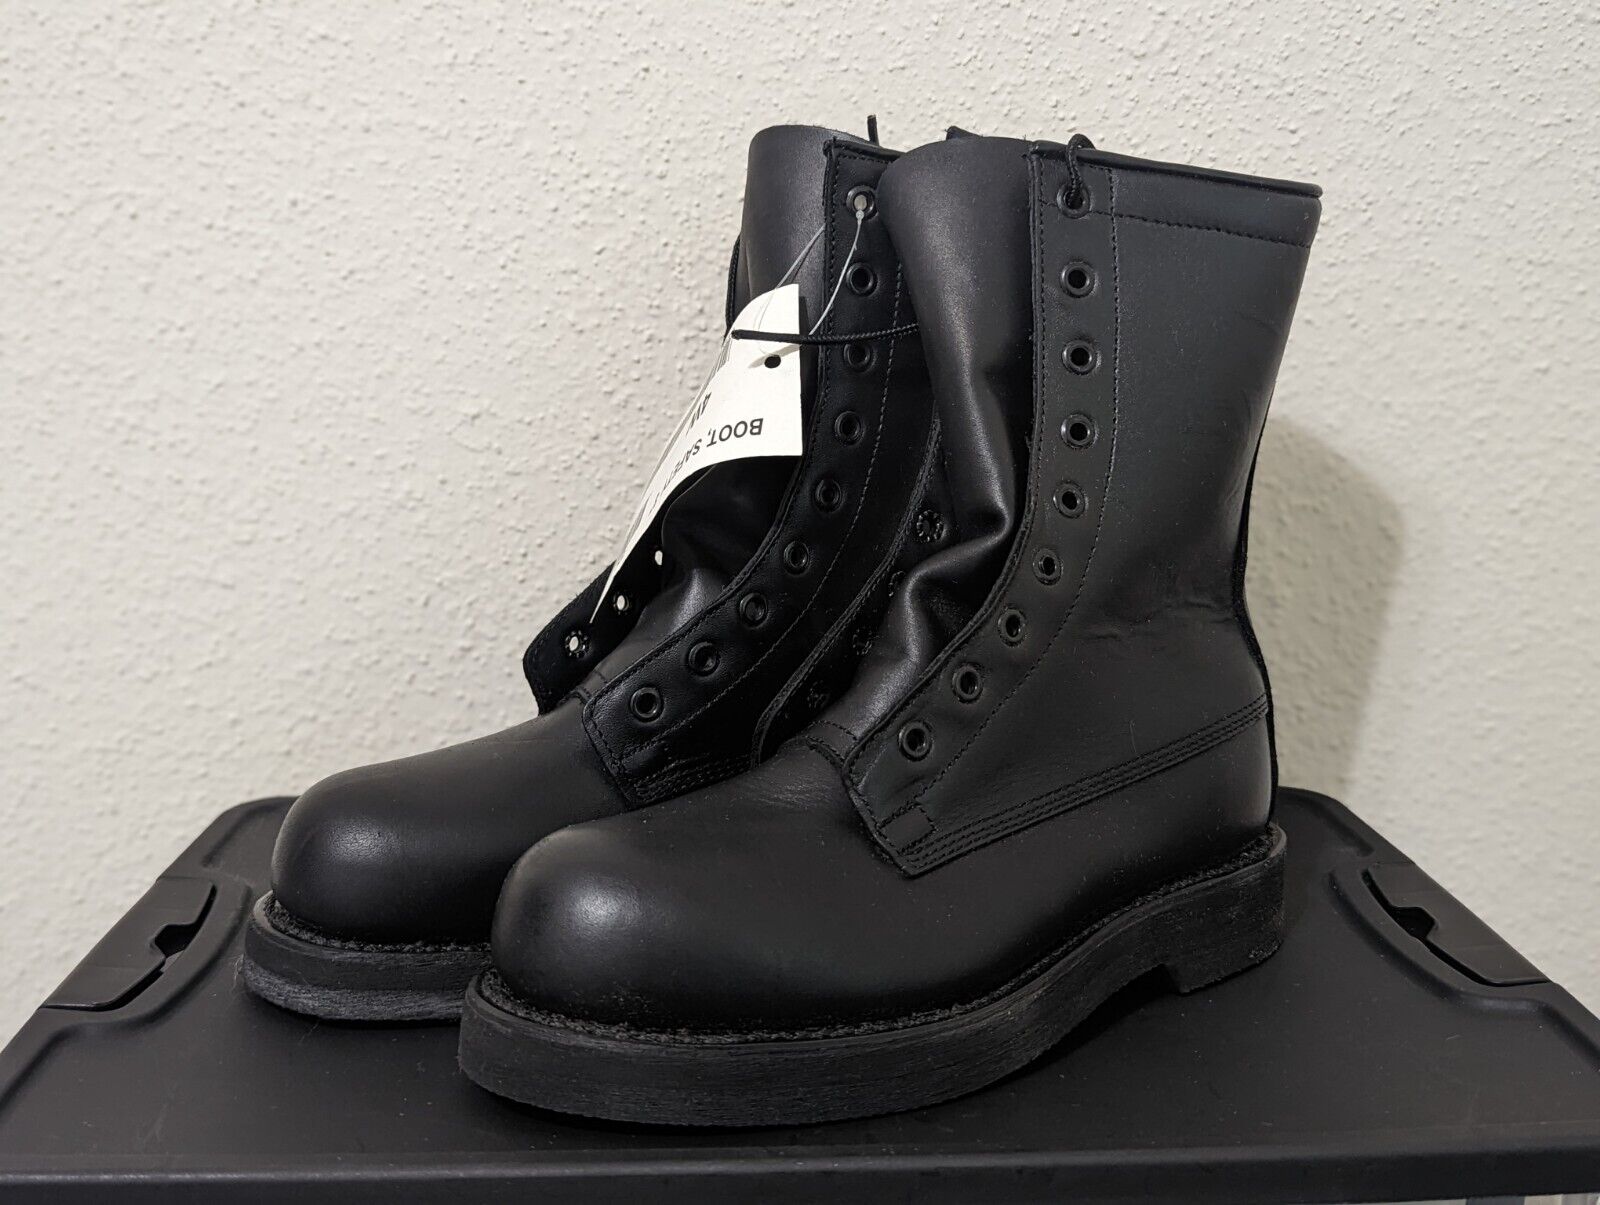 Addison Boots New 4 Wide Steel Toe Black Leather Military DSCP New 461003 Vibram